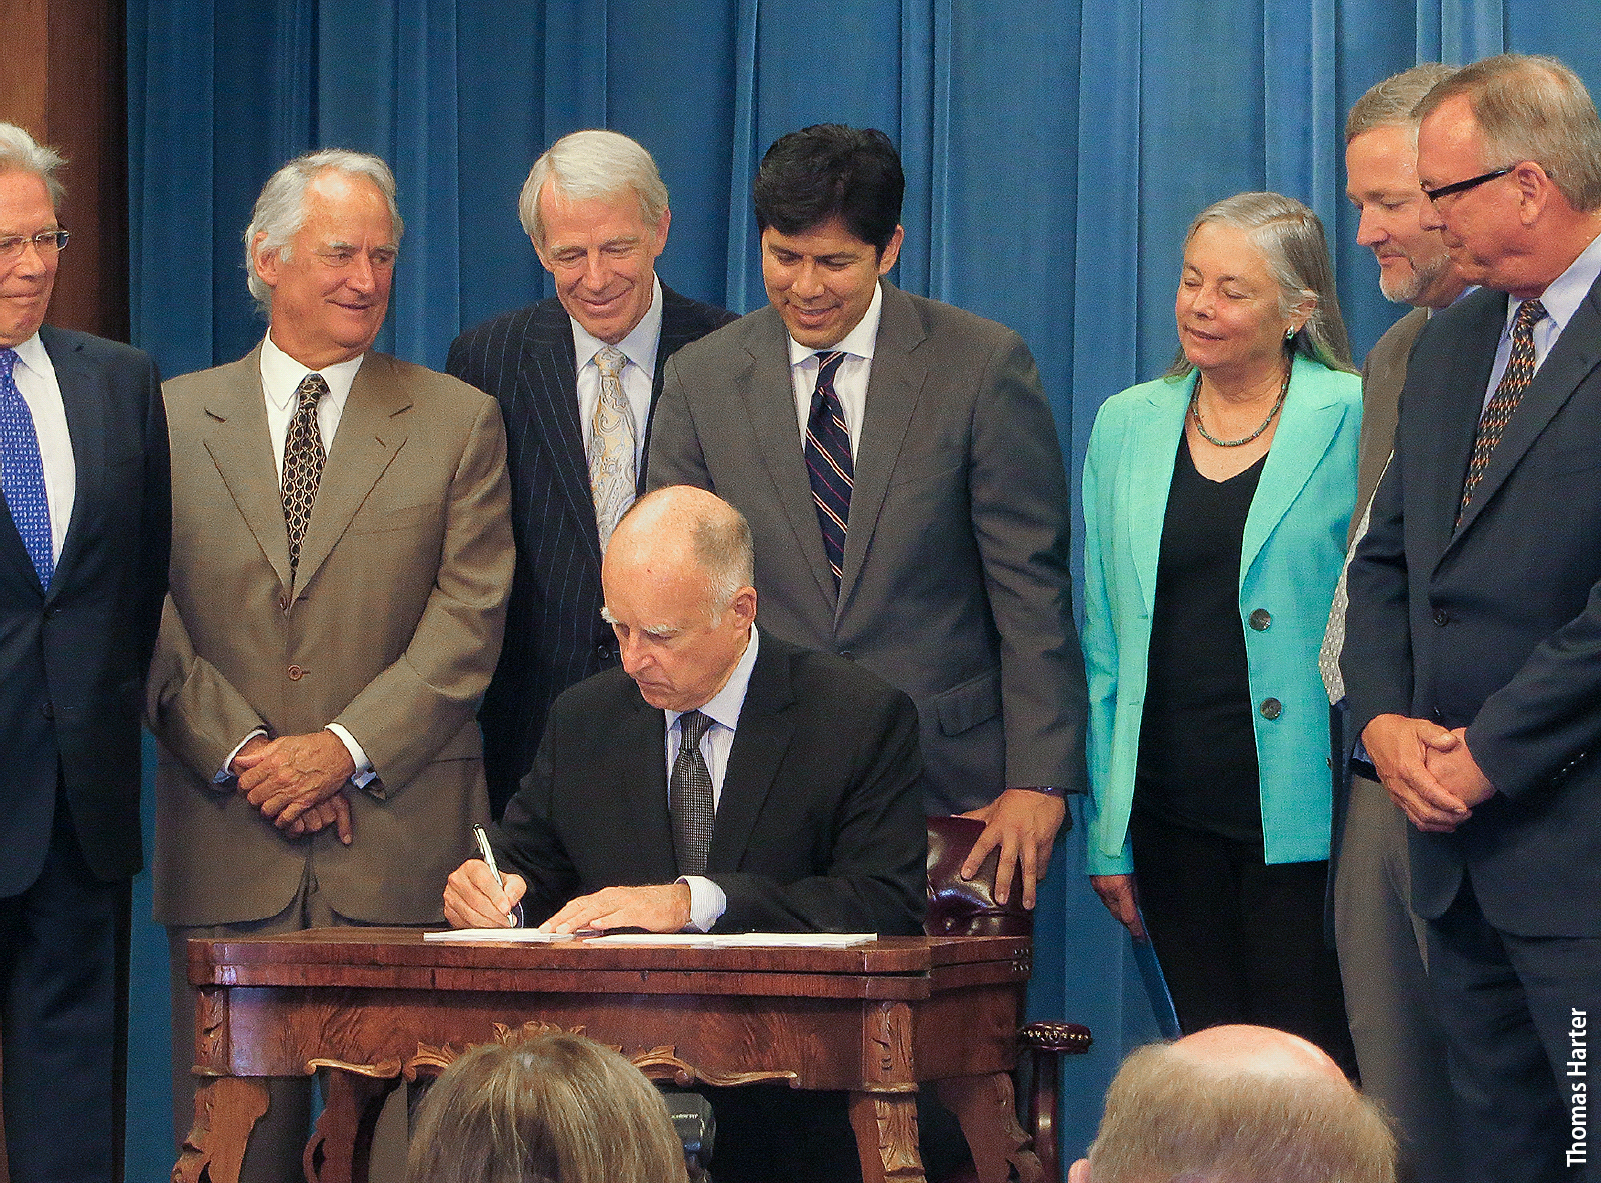 California Gov. Jerry Brown signed the new groundwater legislation into law in September 2014.